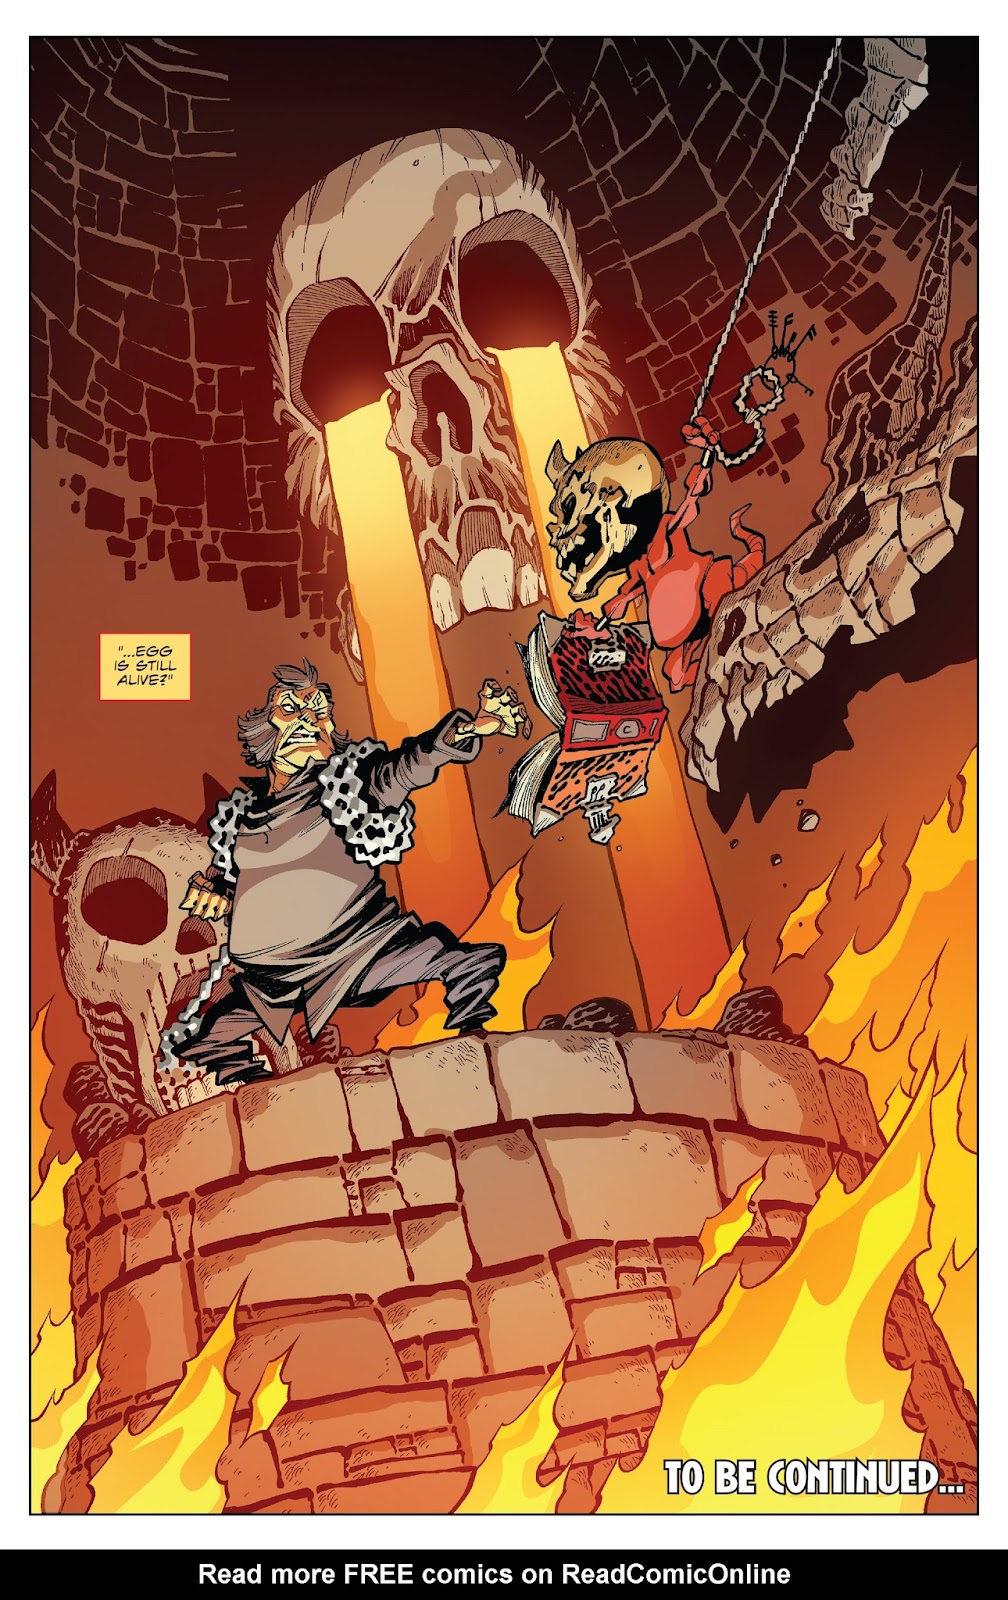 Big Trouble in Little China: Old Man Jack issue 6 - Page 24